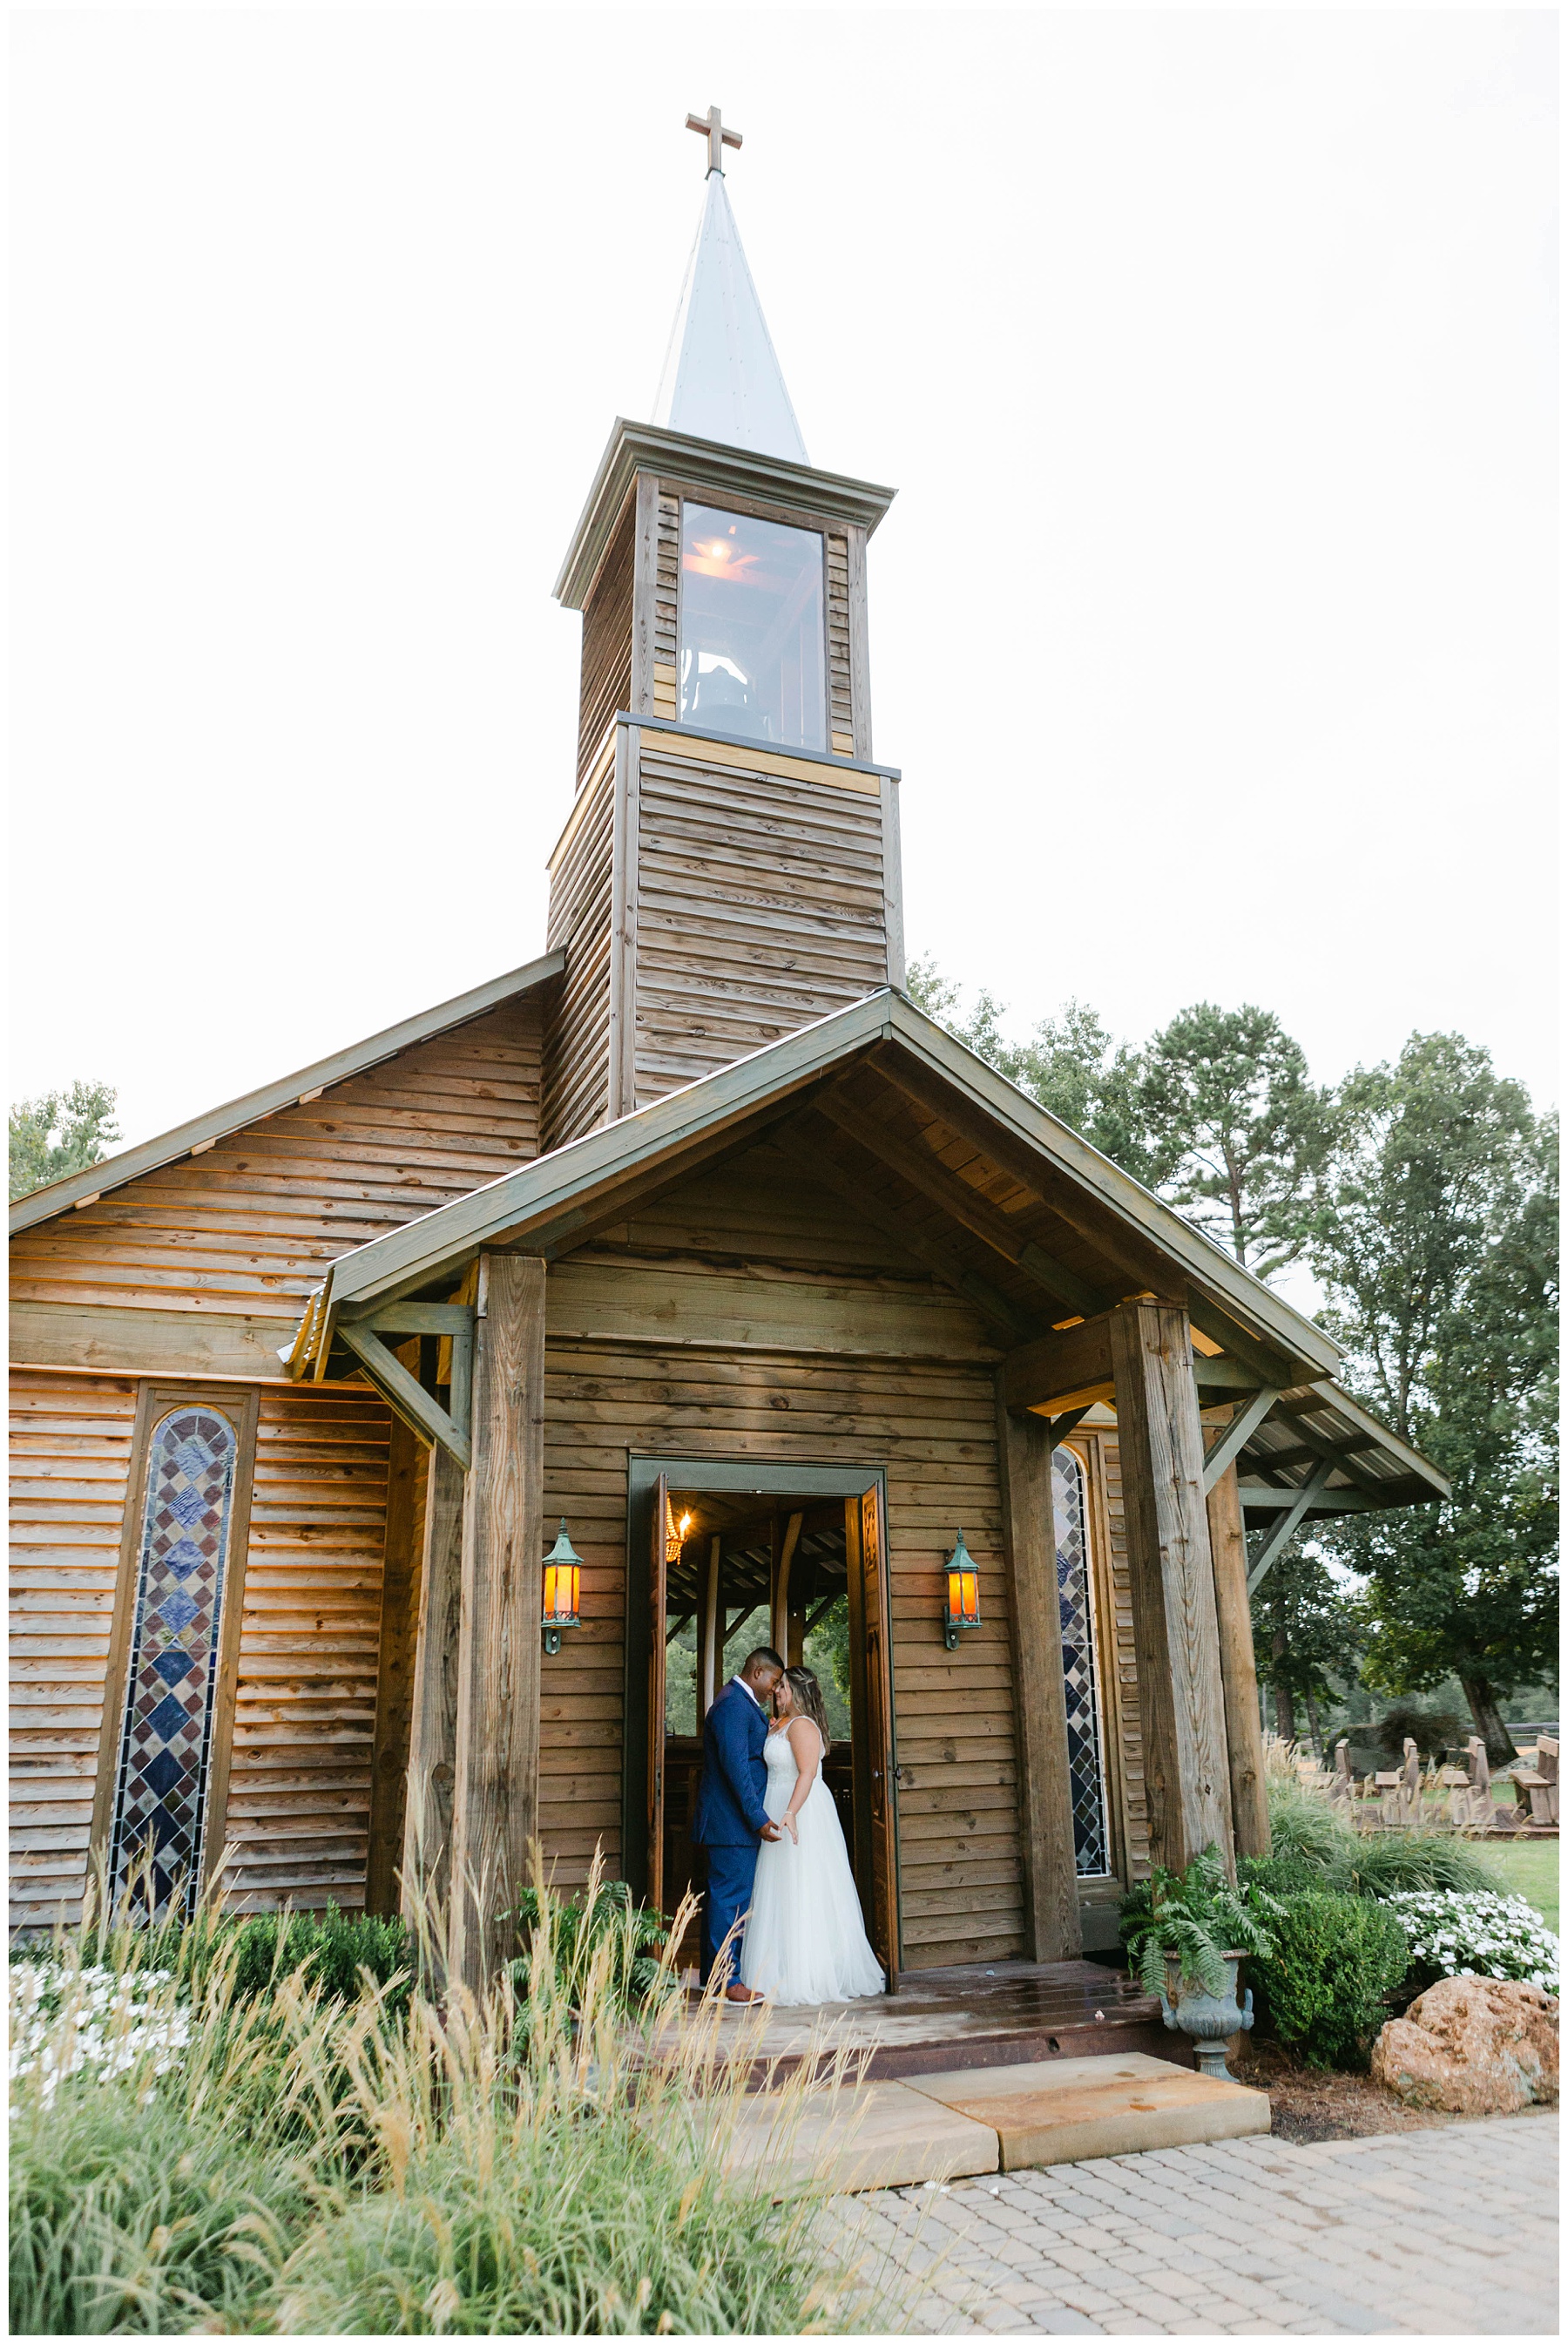 Bride and groom nuzzling in doorway of The Kelly chapel at Pine Knoll Farms